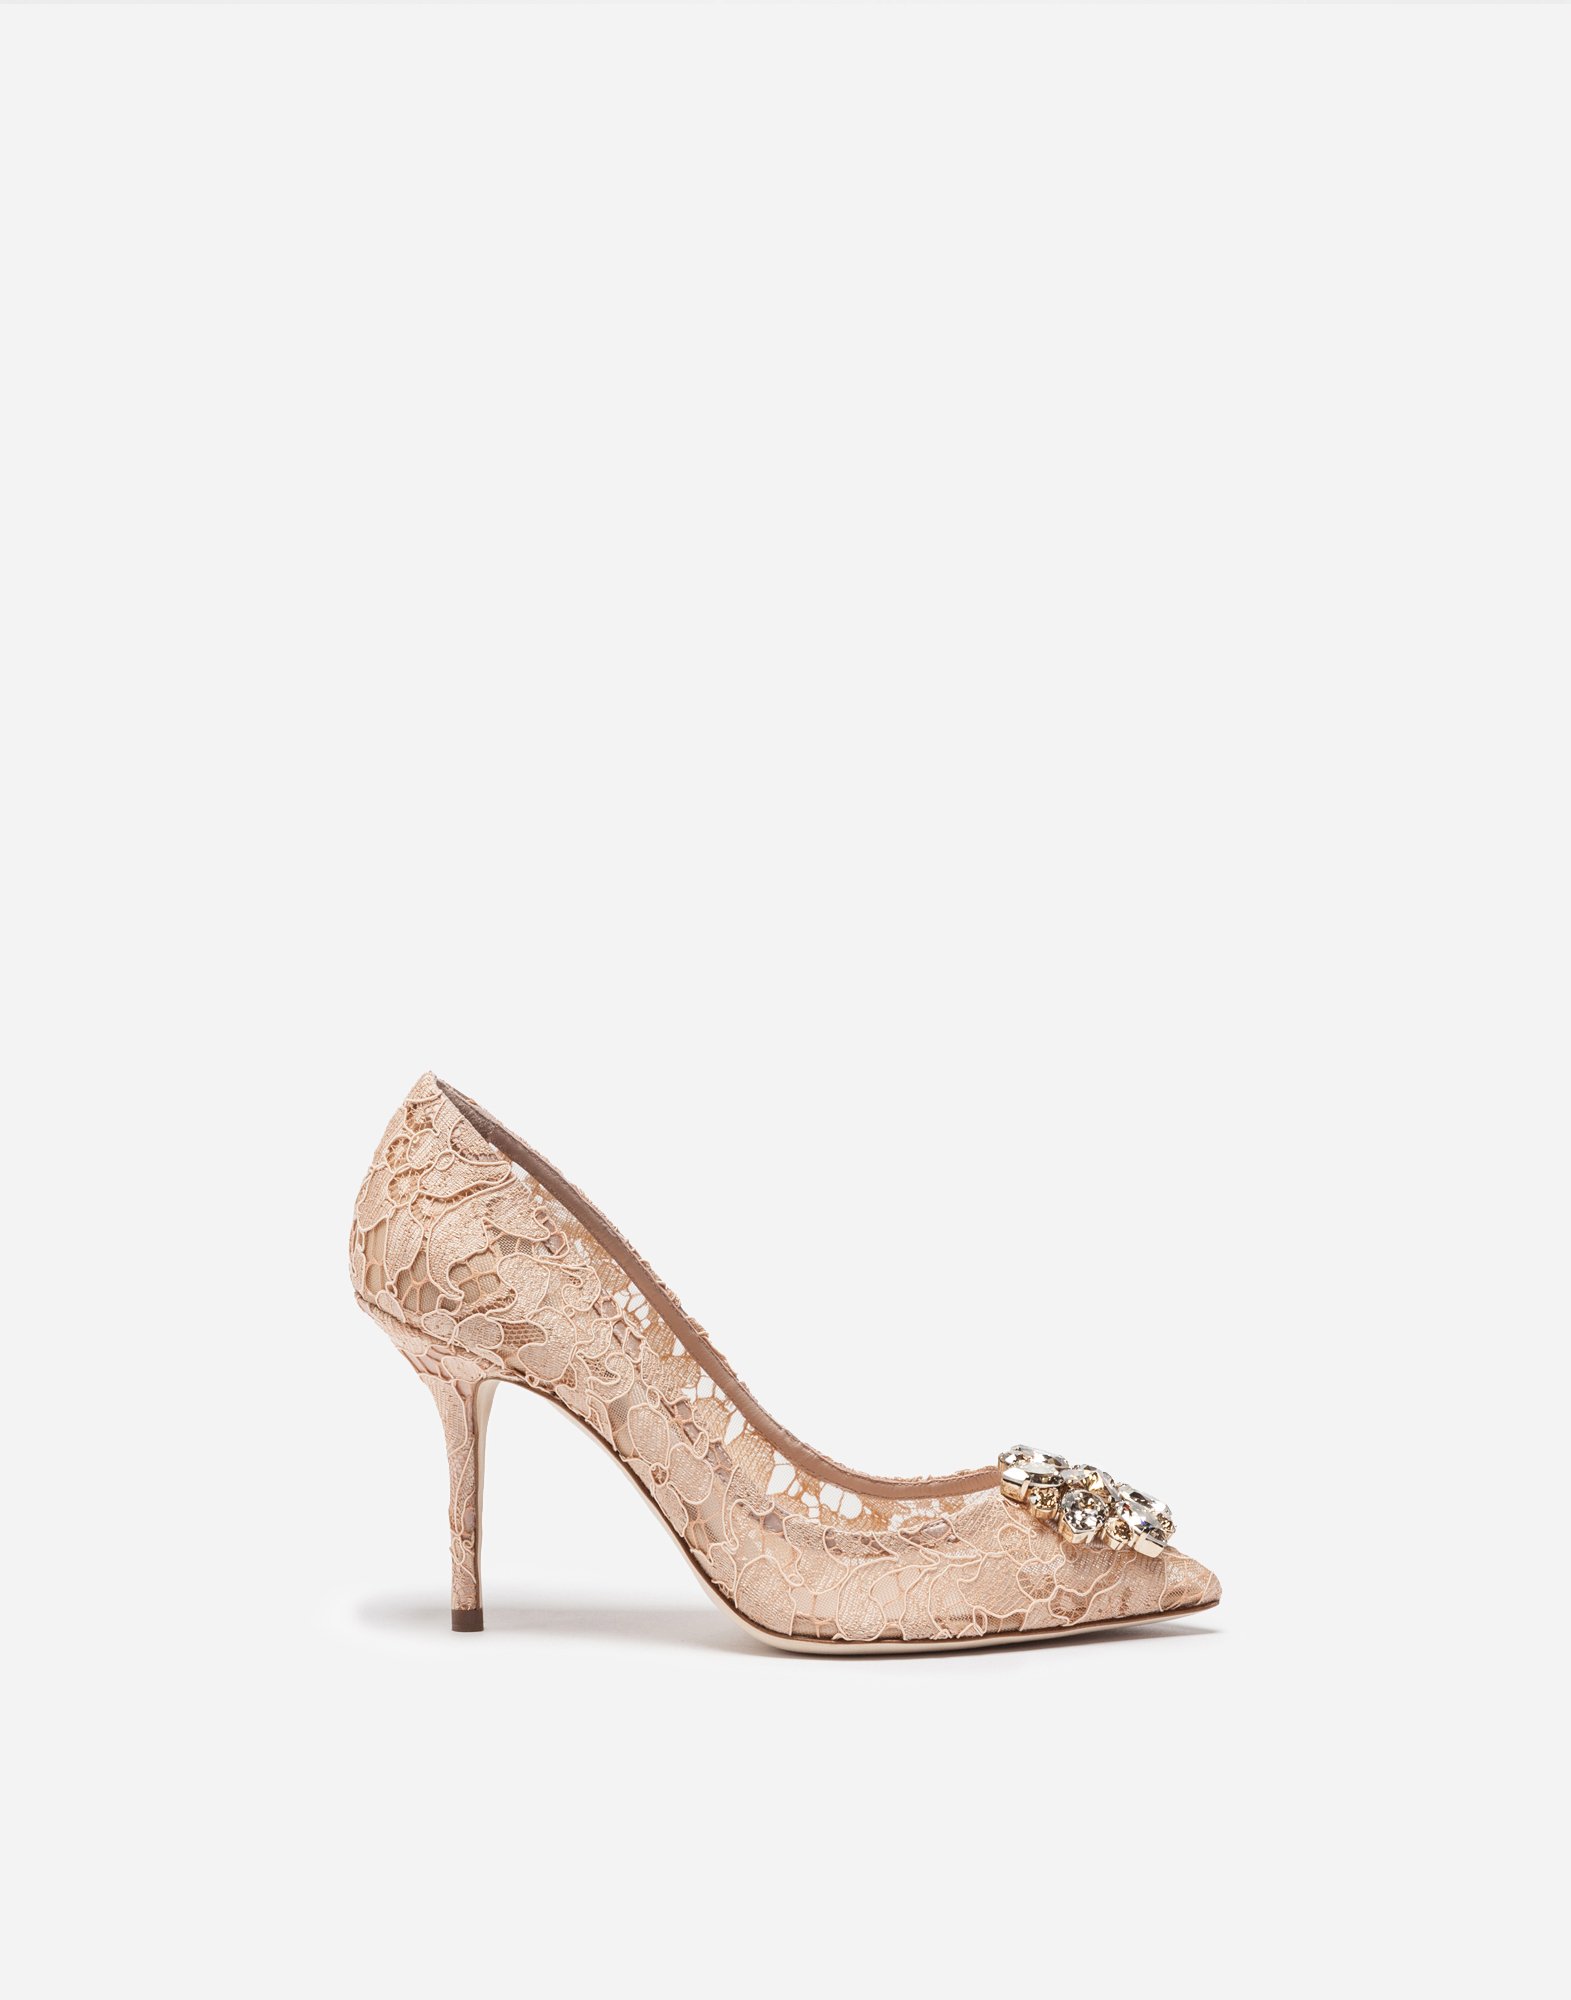 Pump in Taormina lace with crystals in Pink